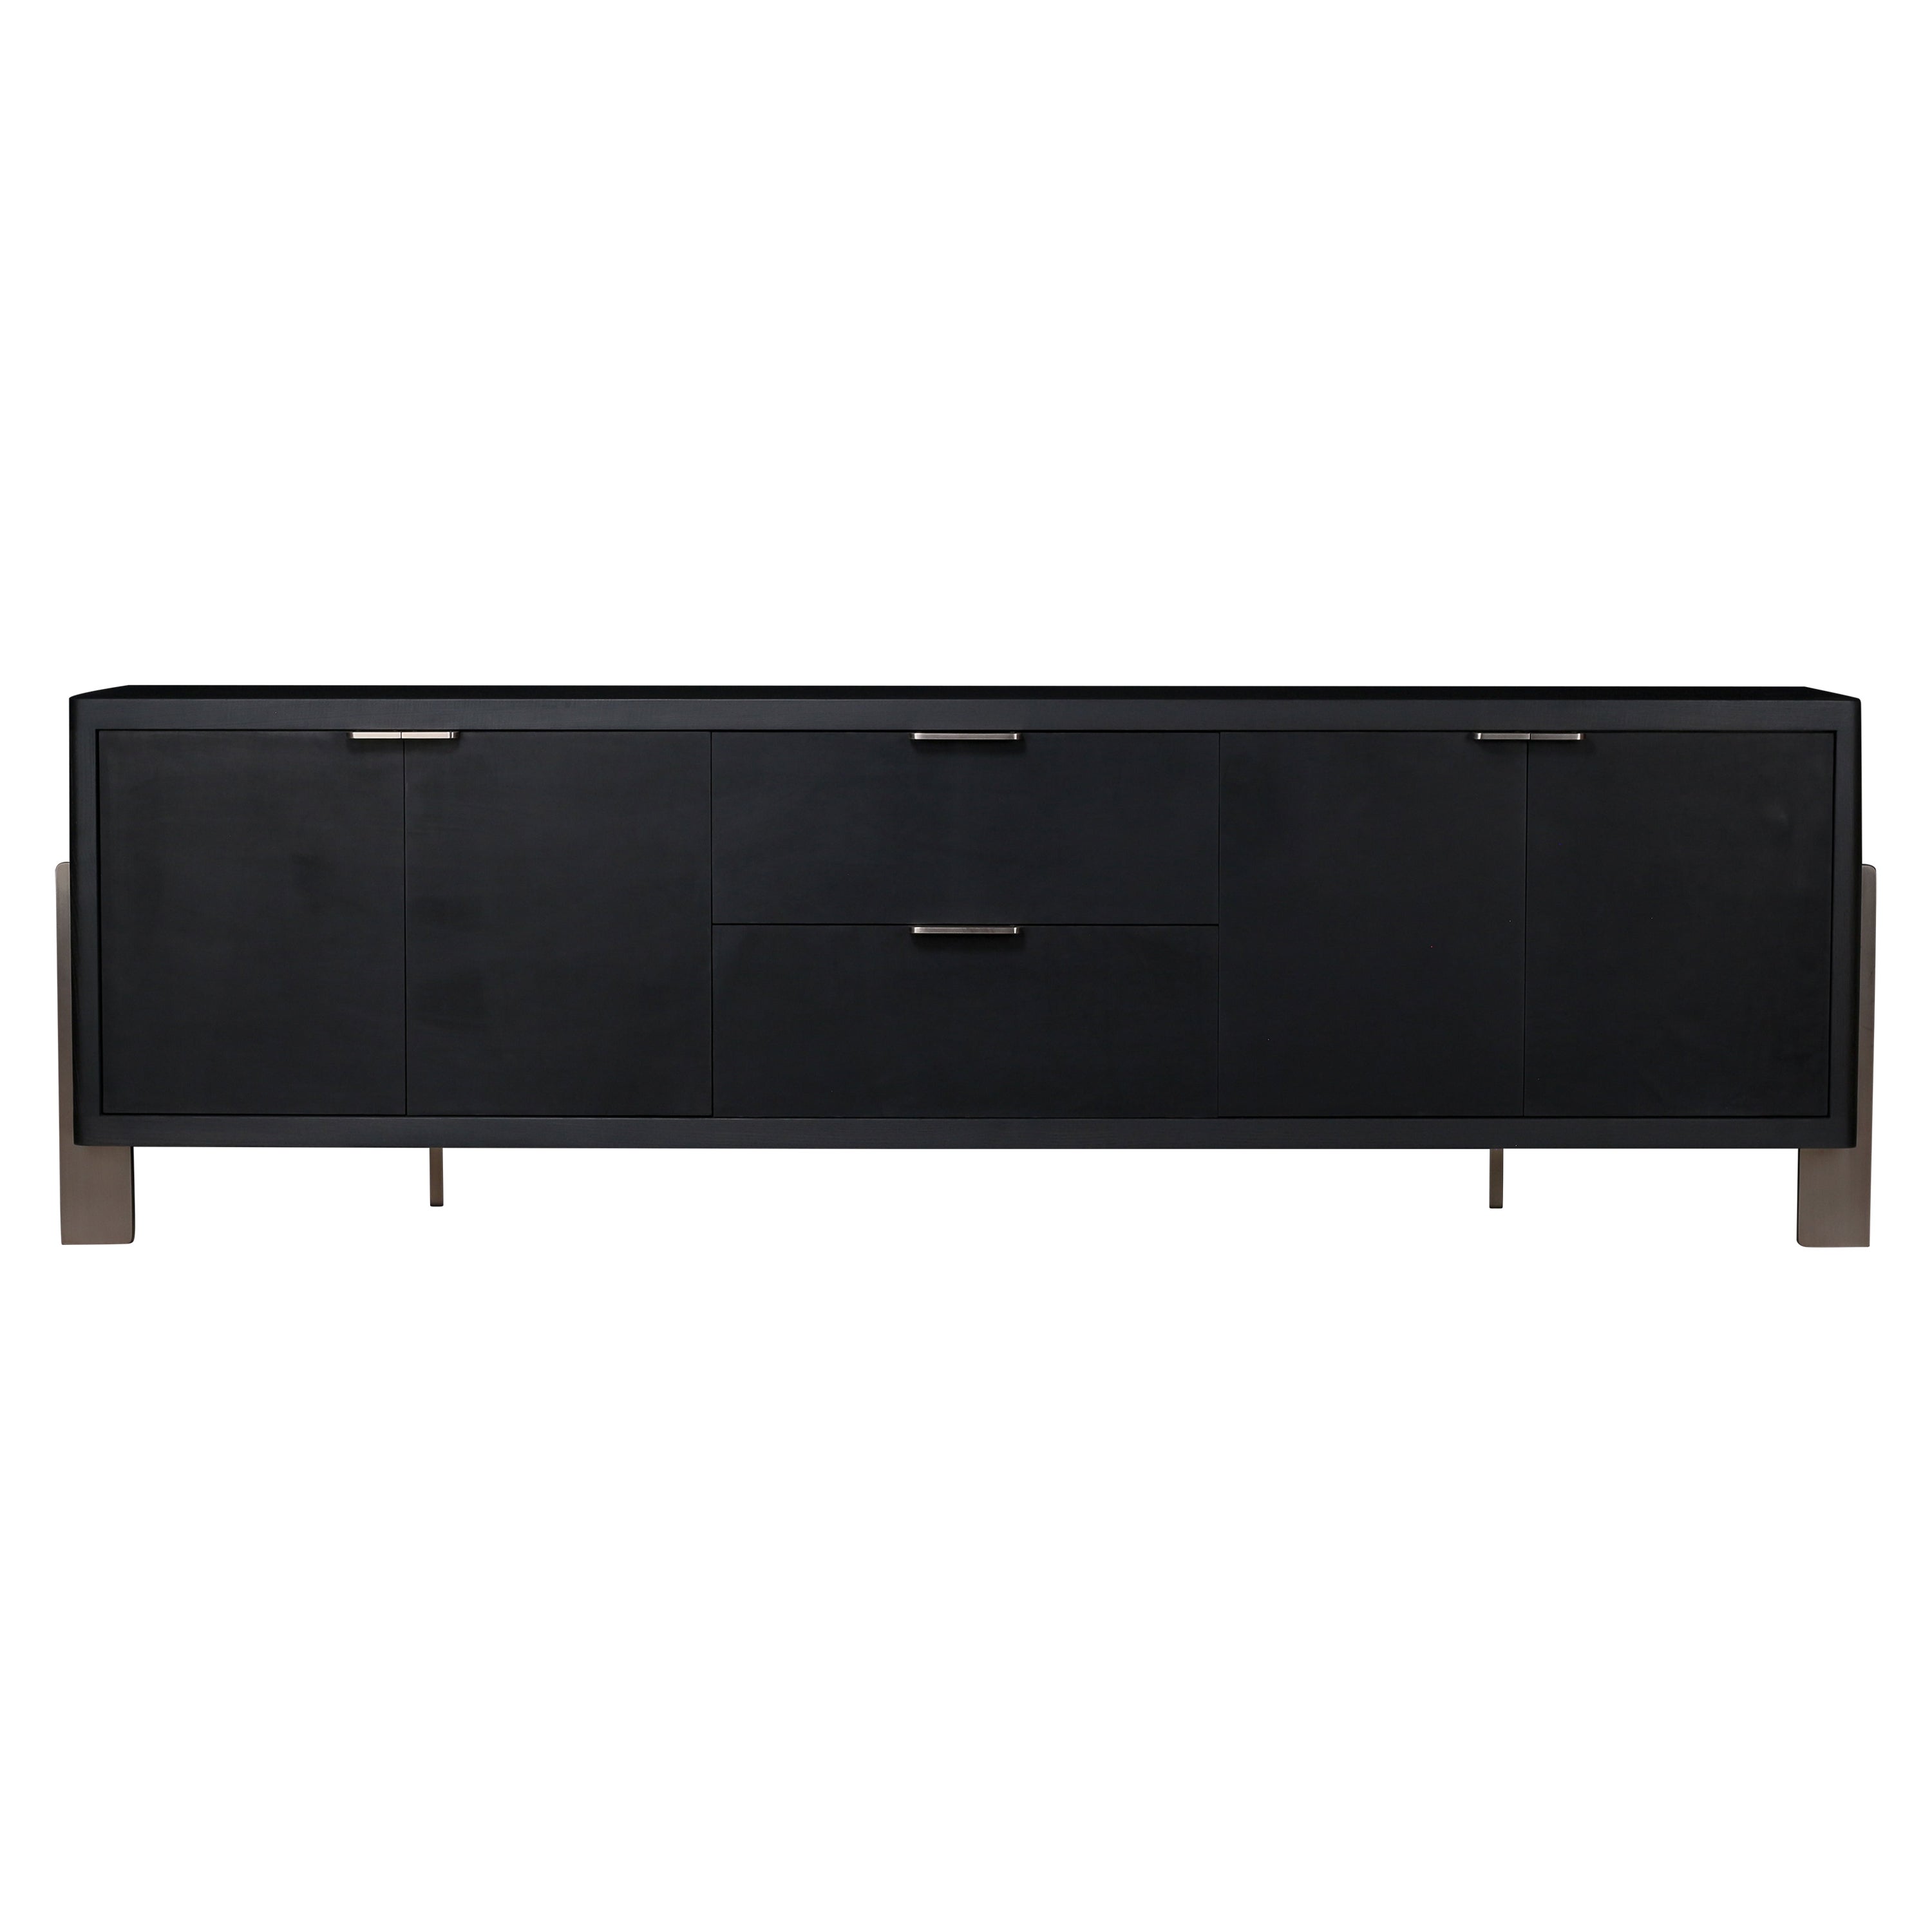 Dreyfus Sideboard, by AMBROZIA, Ebonized Ash, Black Leather & Dull Champagne For Sale